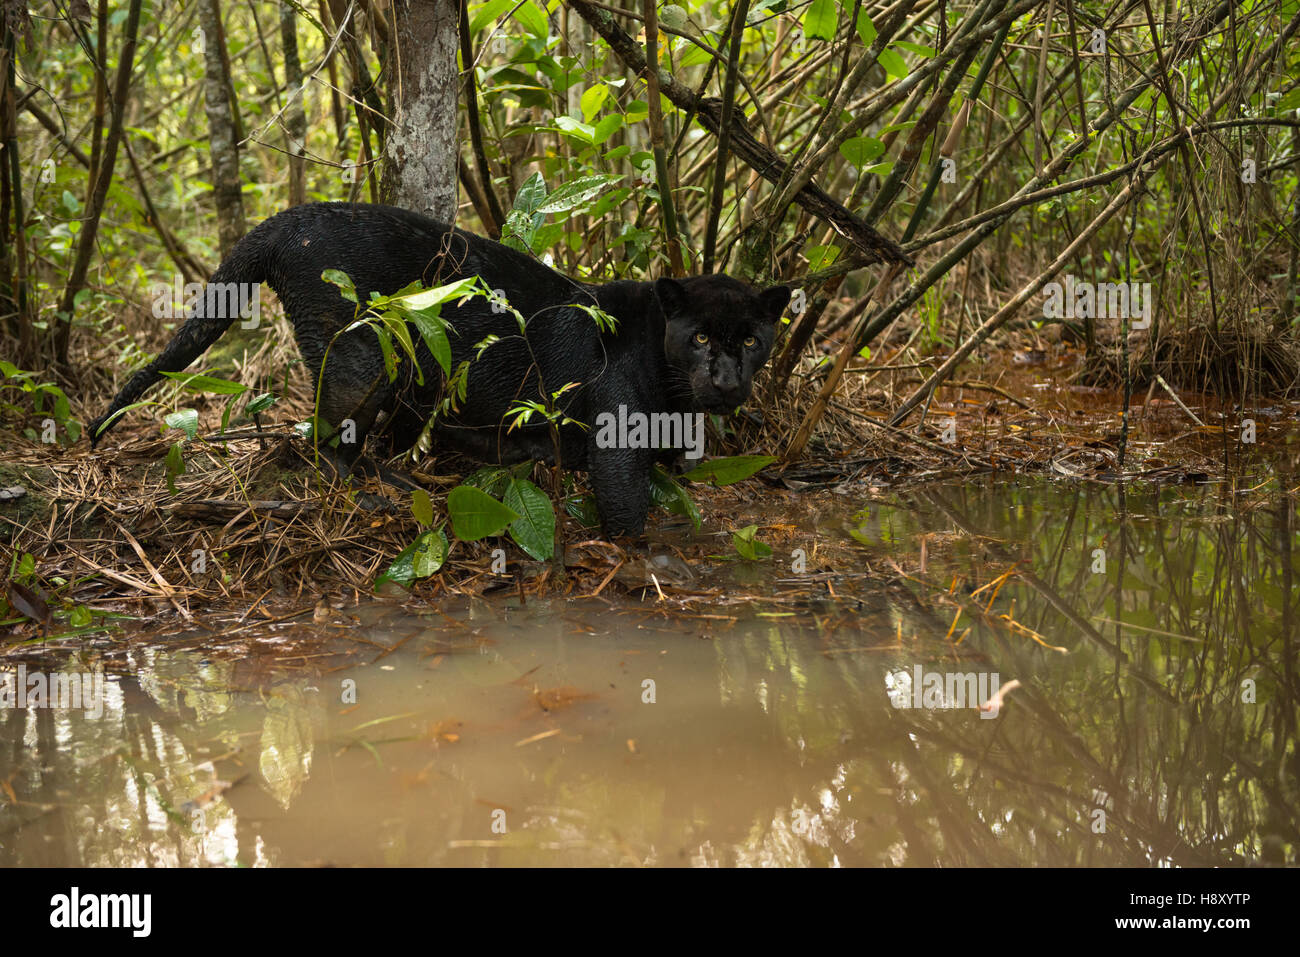 An elusive Black Jaguar patrolling the edge of a creek in the forest Stock Photo